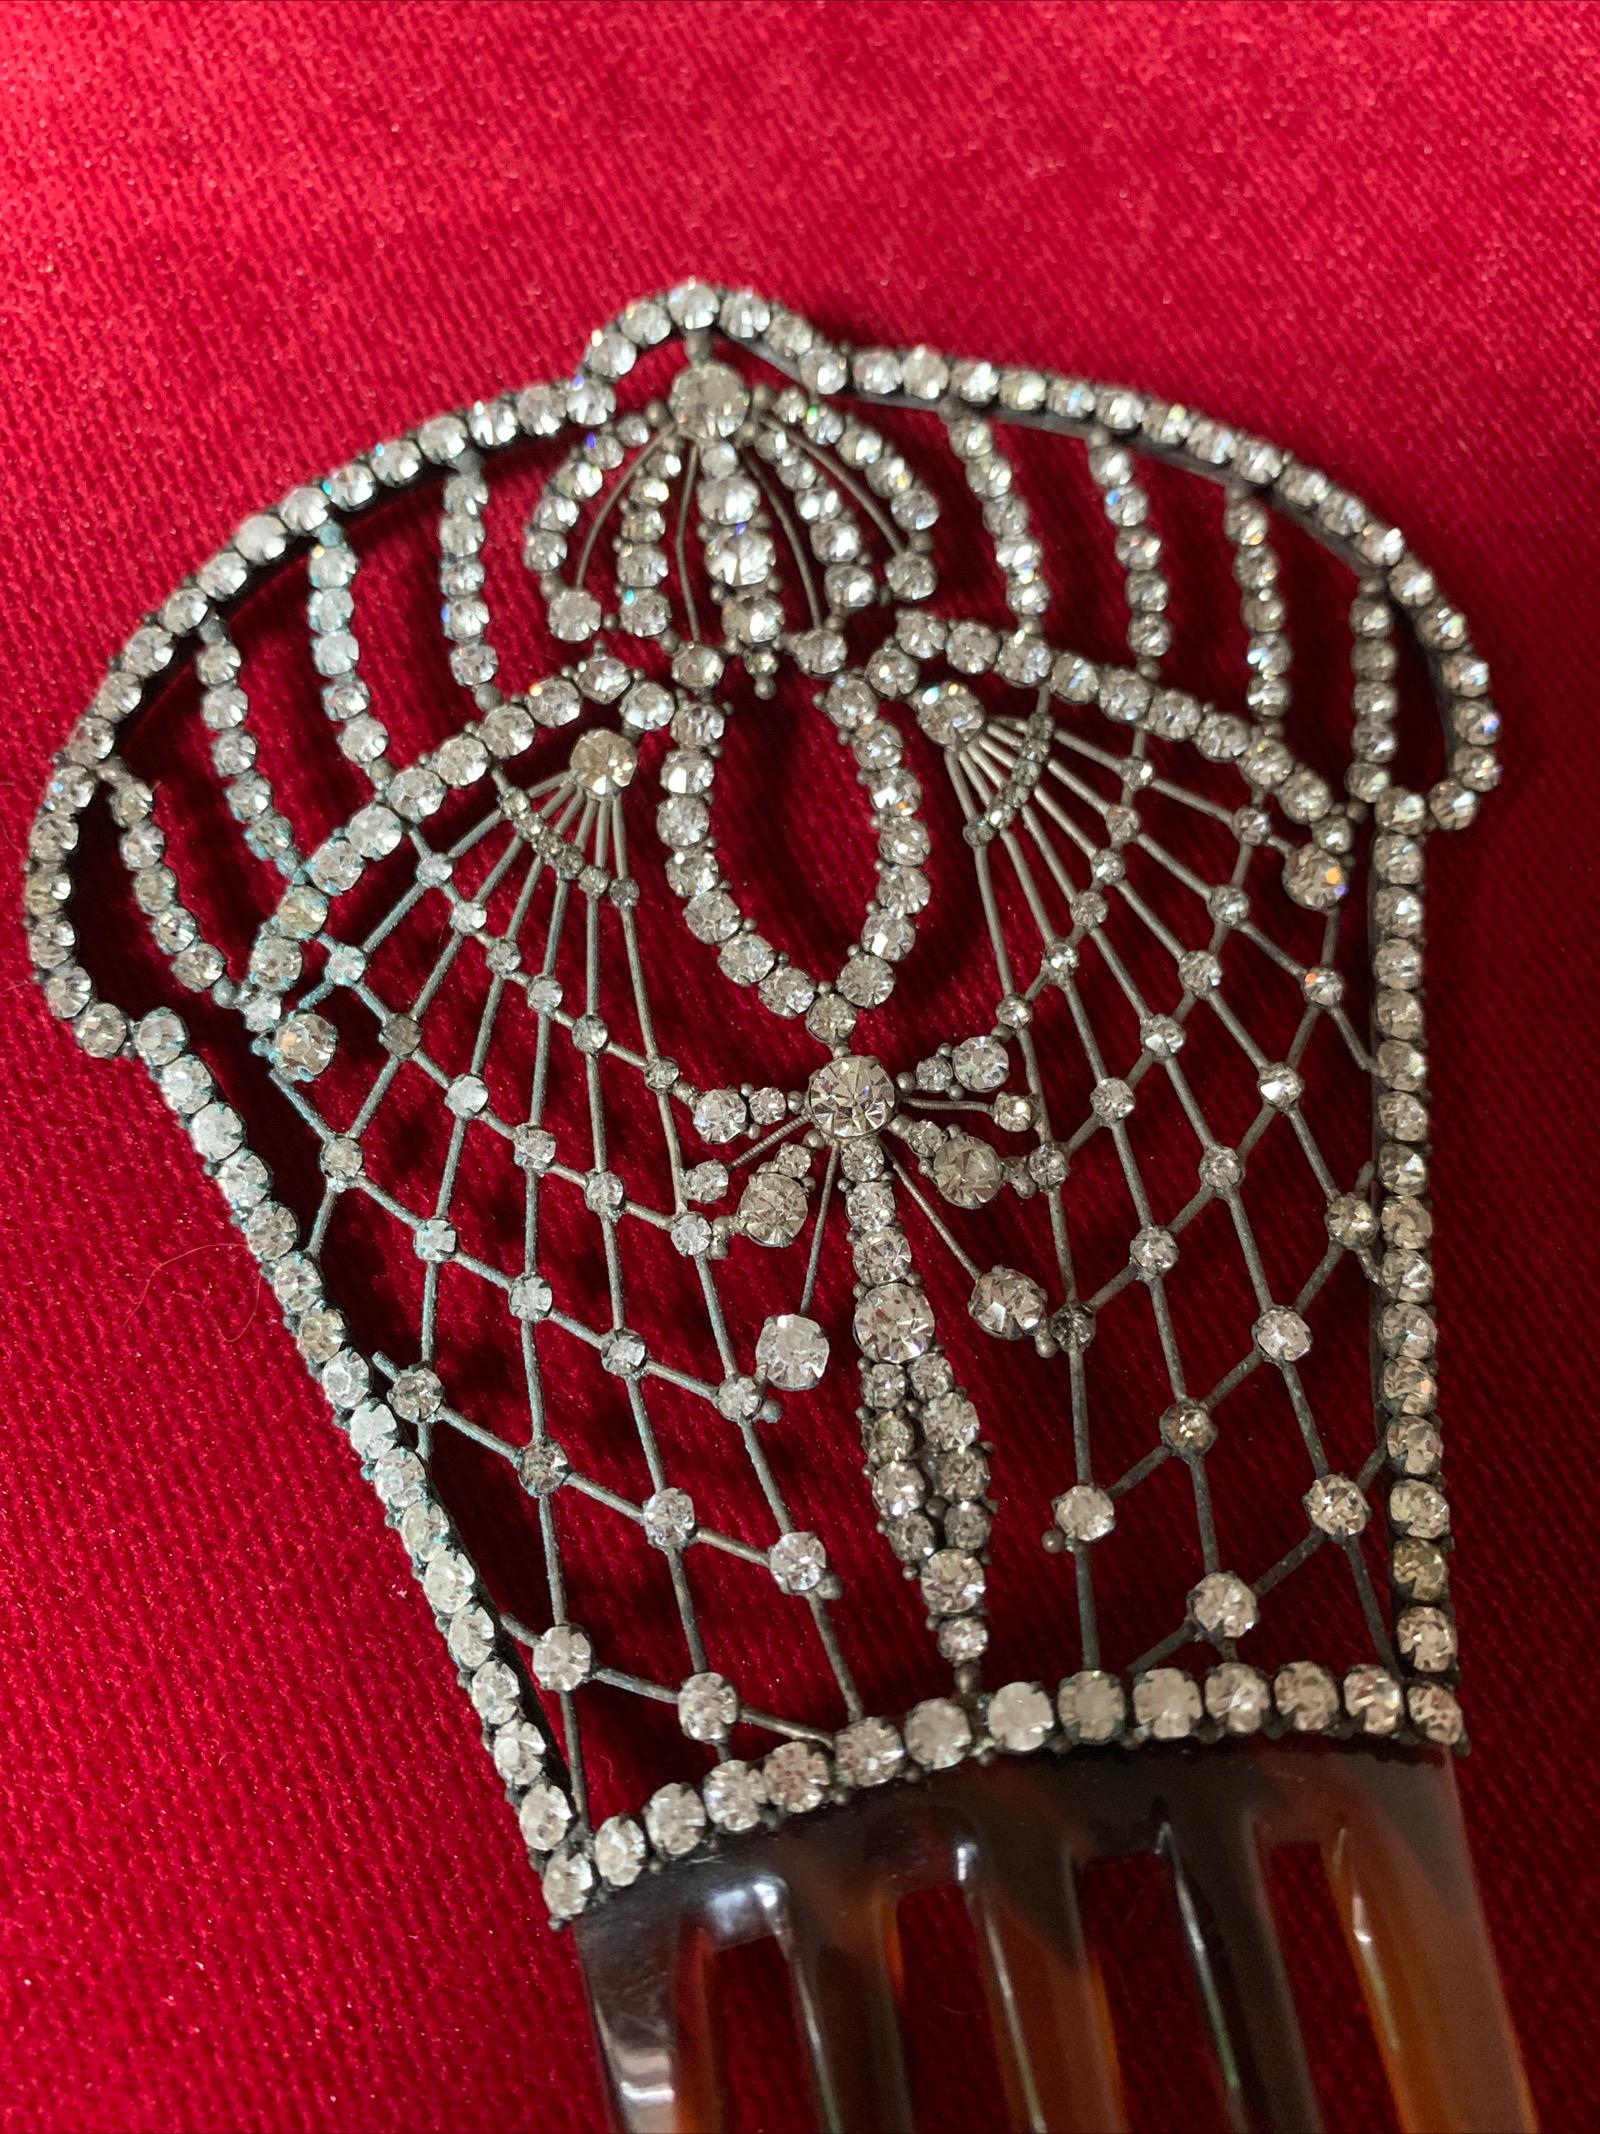 Exquisite Antique Edwardian Paste Hair Comb Ornament Mantilla Mint.

Five prongs.

A stunning tortoiseshell hair comb decorated with beautiful paste crystals .

This is a really amazing piece.

It's in fabulous condition .

A large size Measuring